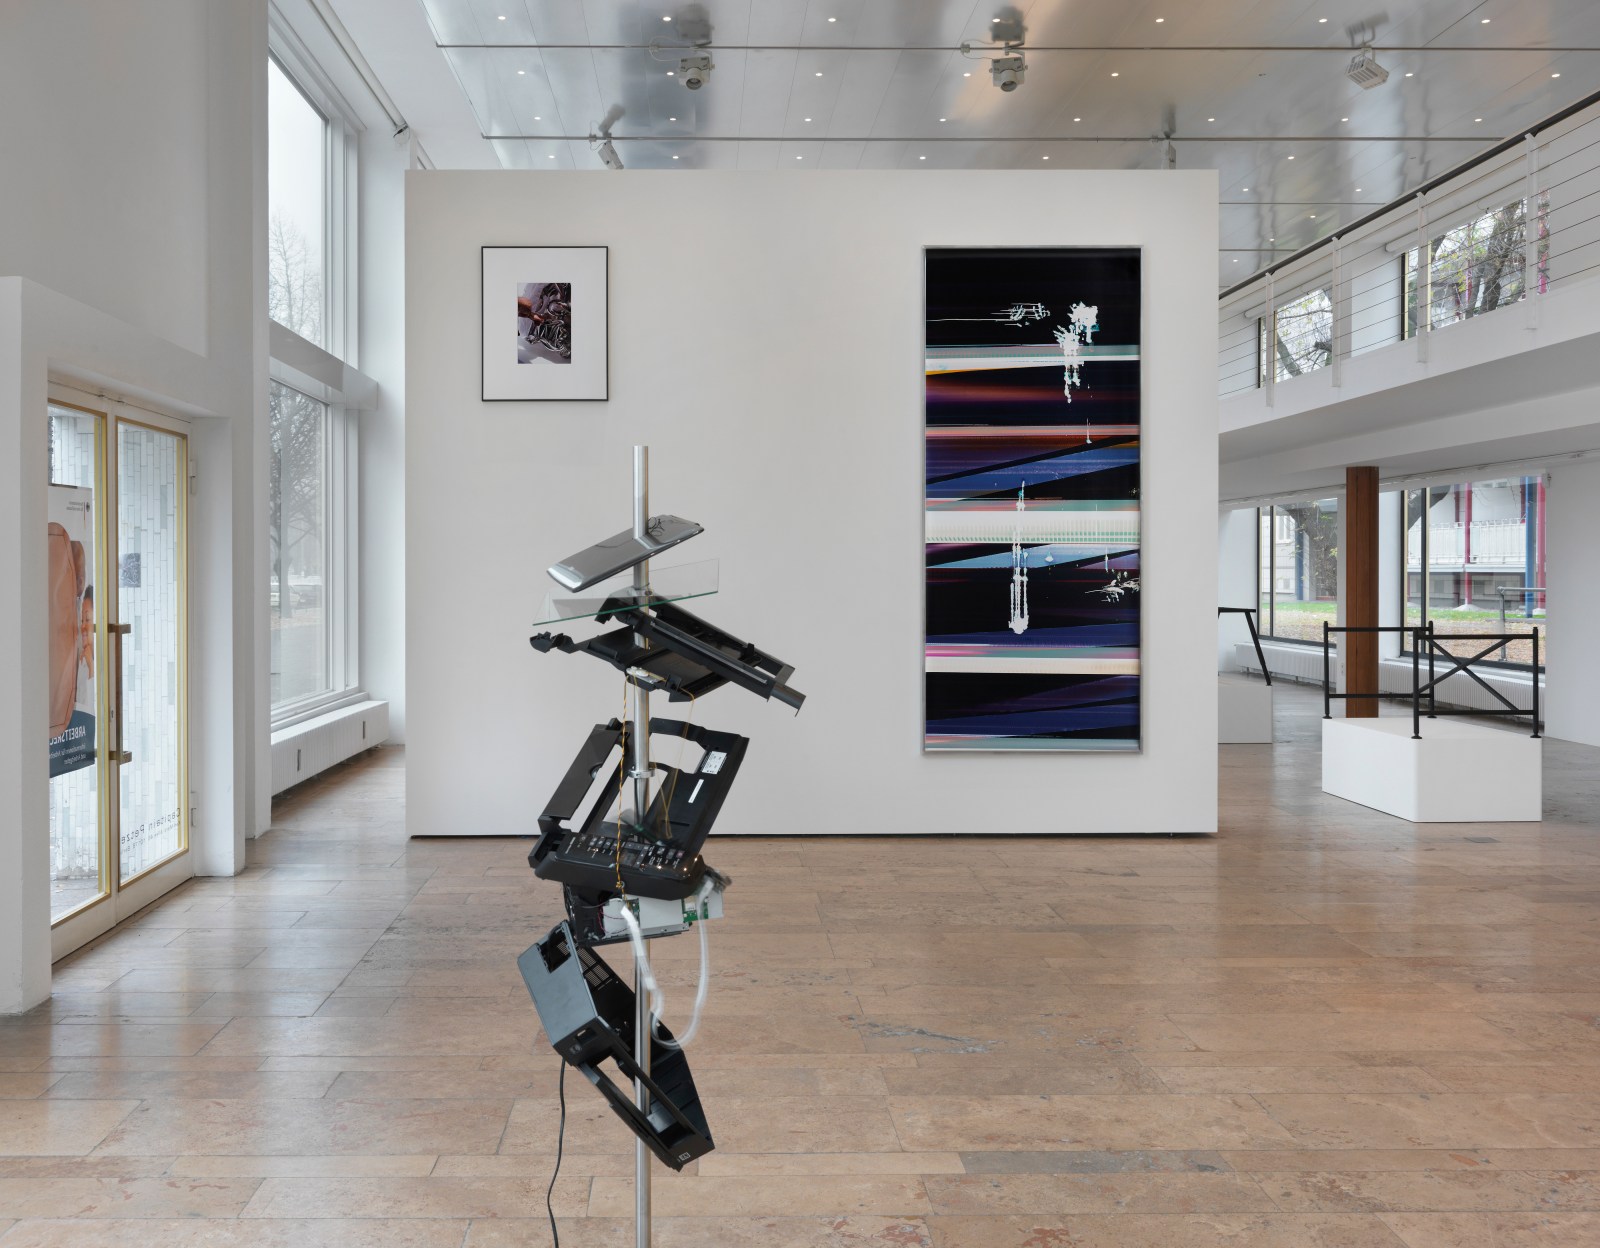 Installation view of Beshty's exhibition at Capitain Petzel featuring a deconstructed computer work in the center of the floor and a large black curl piece on the wall in the background.